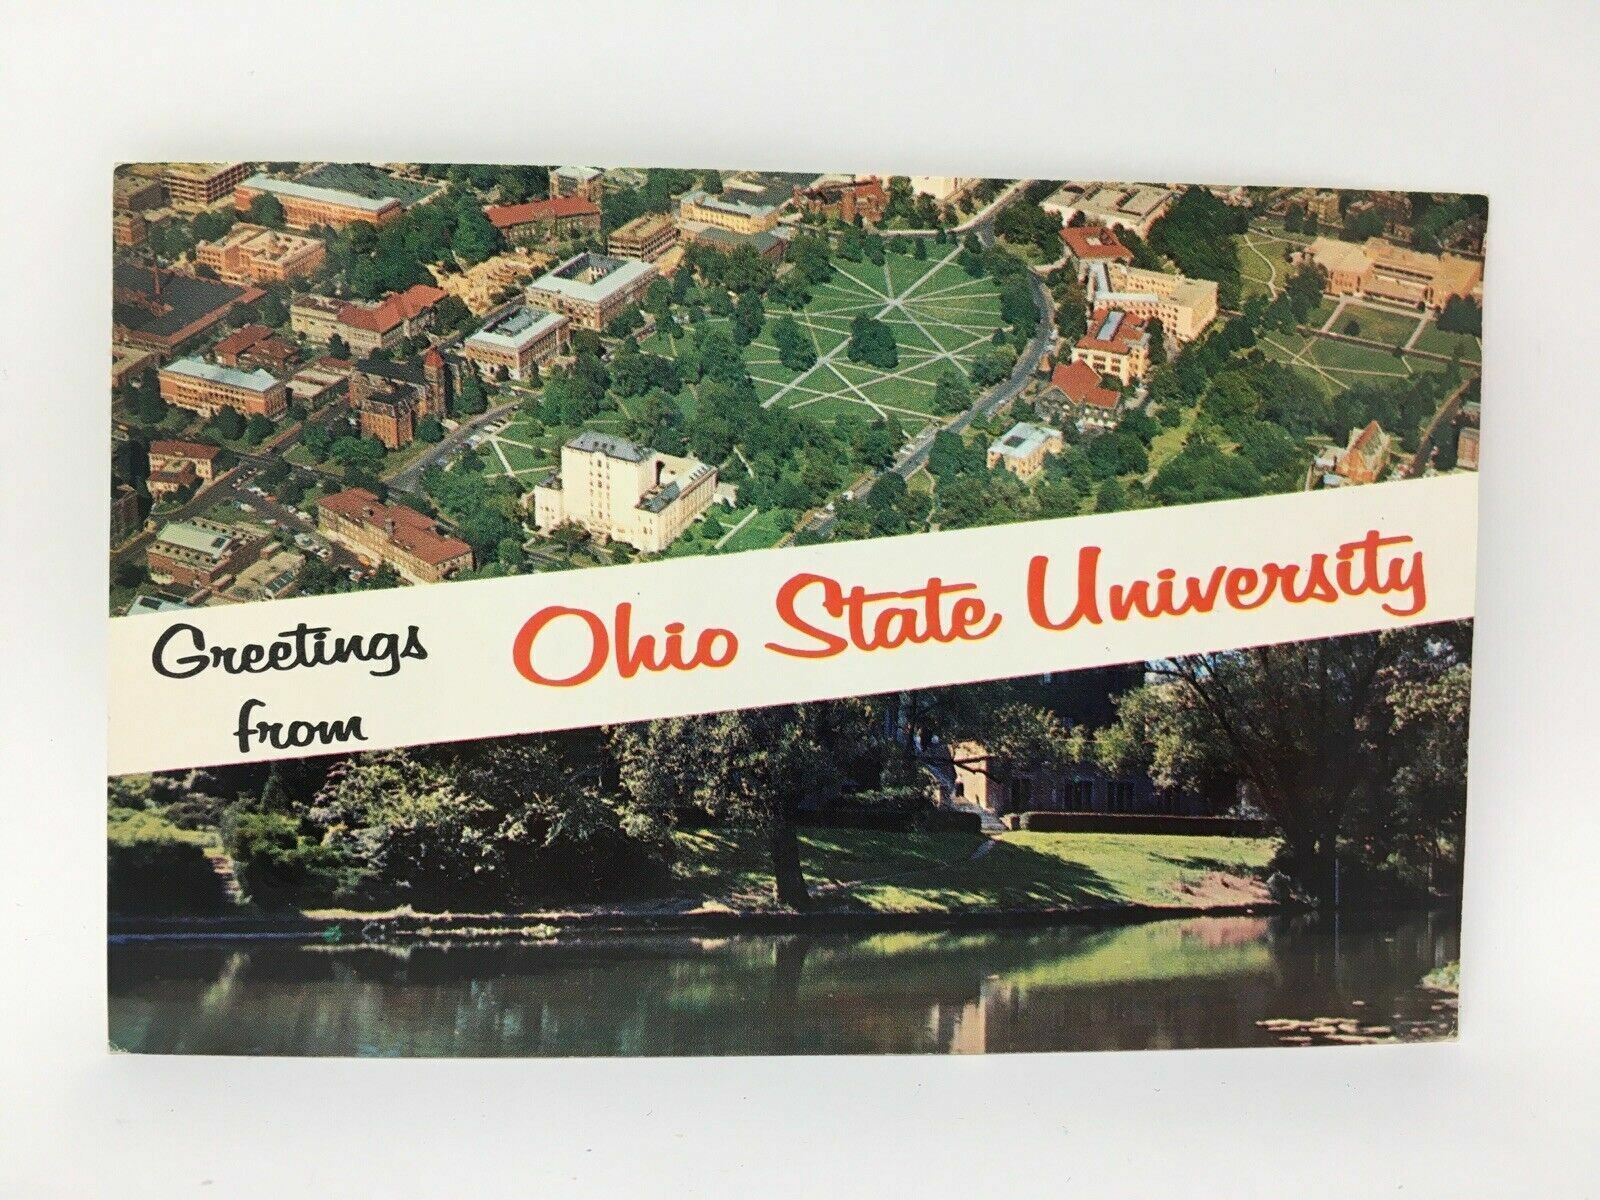 1964 Ohio State University Greetings from Postcard Split View Aerial 